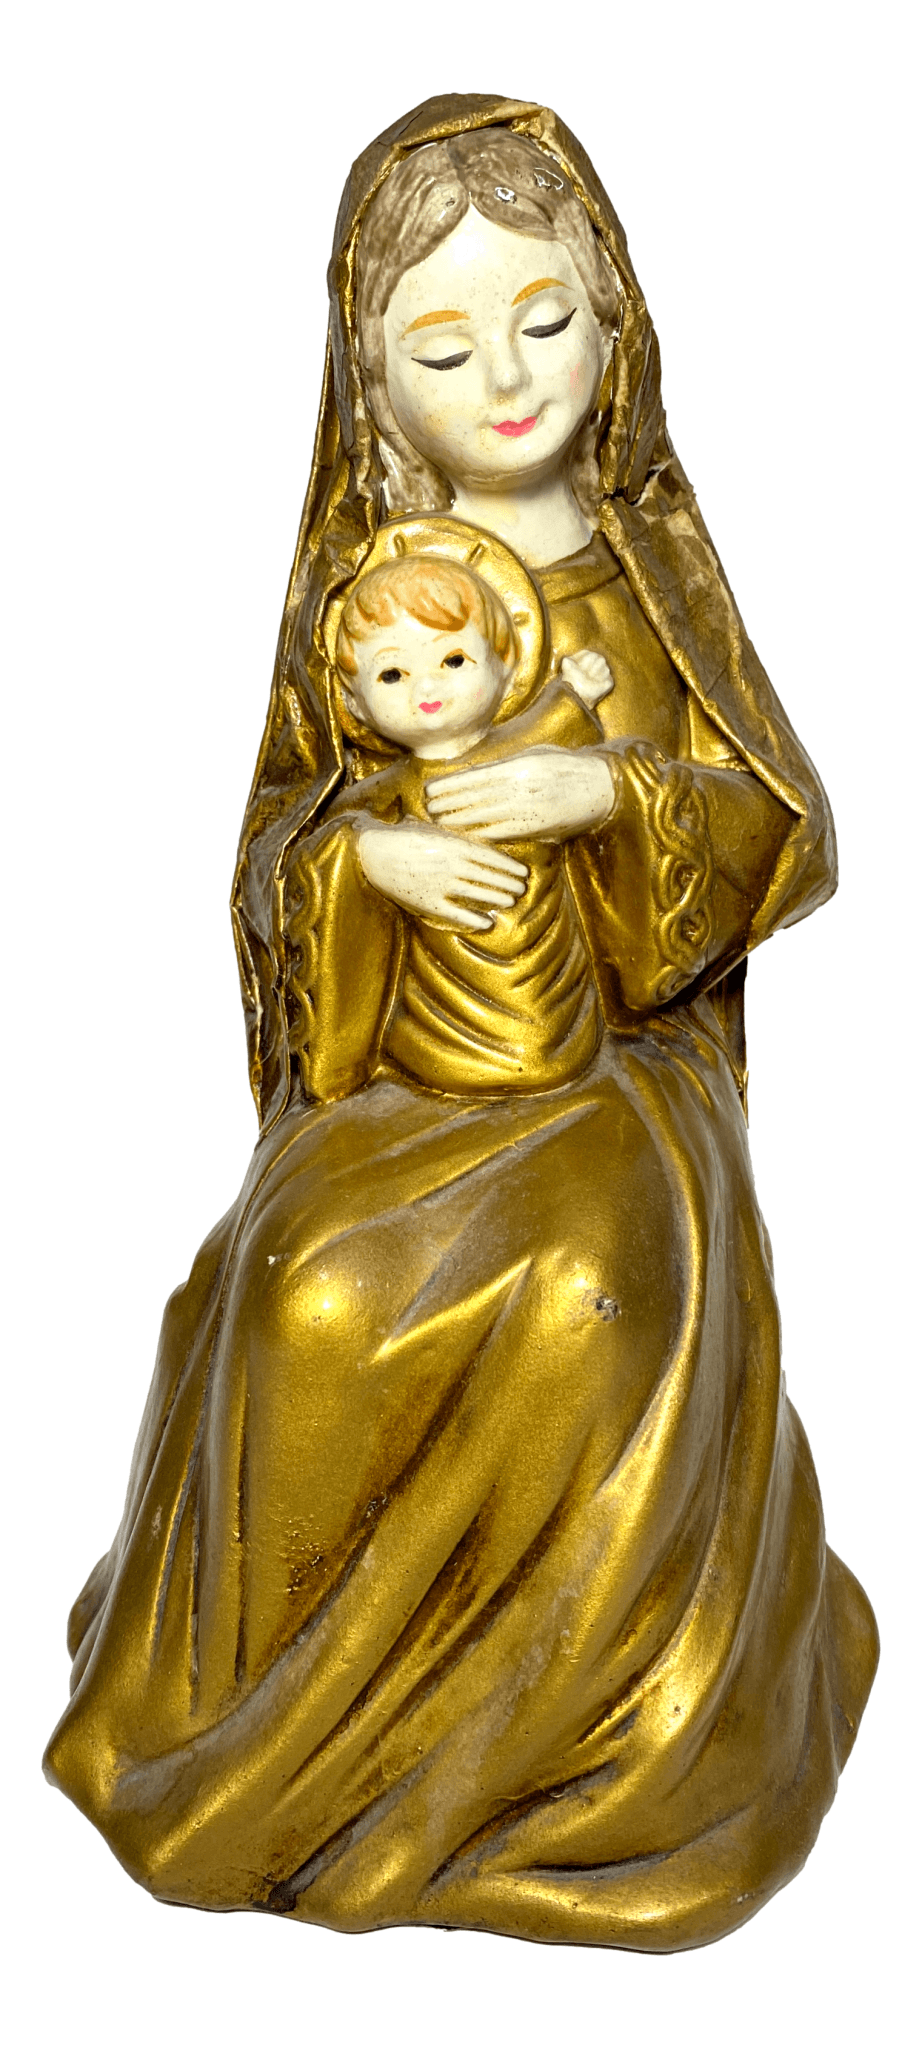 Statue Sitting Madonna Child Clay Body Paper Mache Shawl Gold Tone Handpainted 4 3/4 L x 4 W x 8 1/2 H Inches - Ysleta Mission Gift Shop- VOTED El Paso's Best Gift Shop